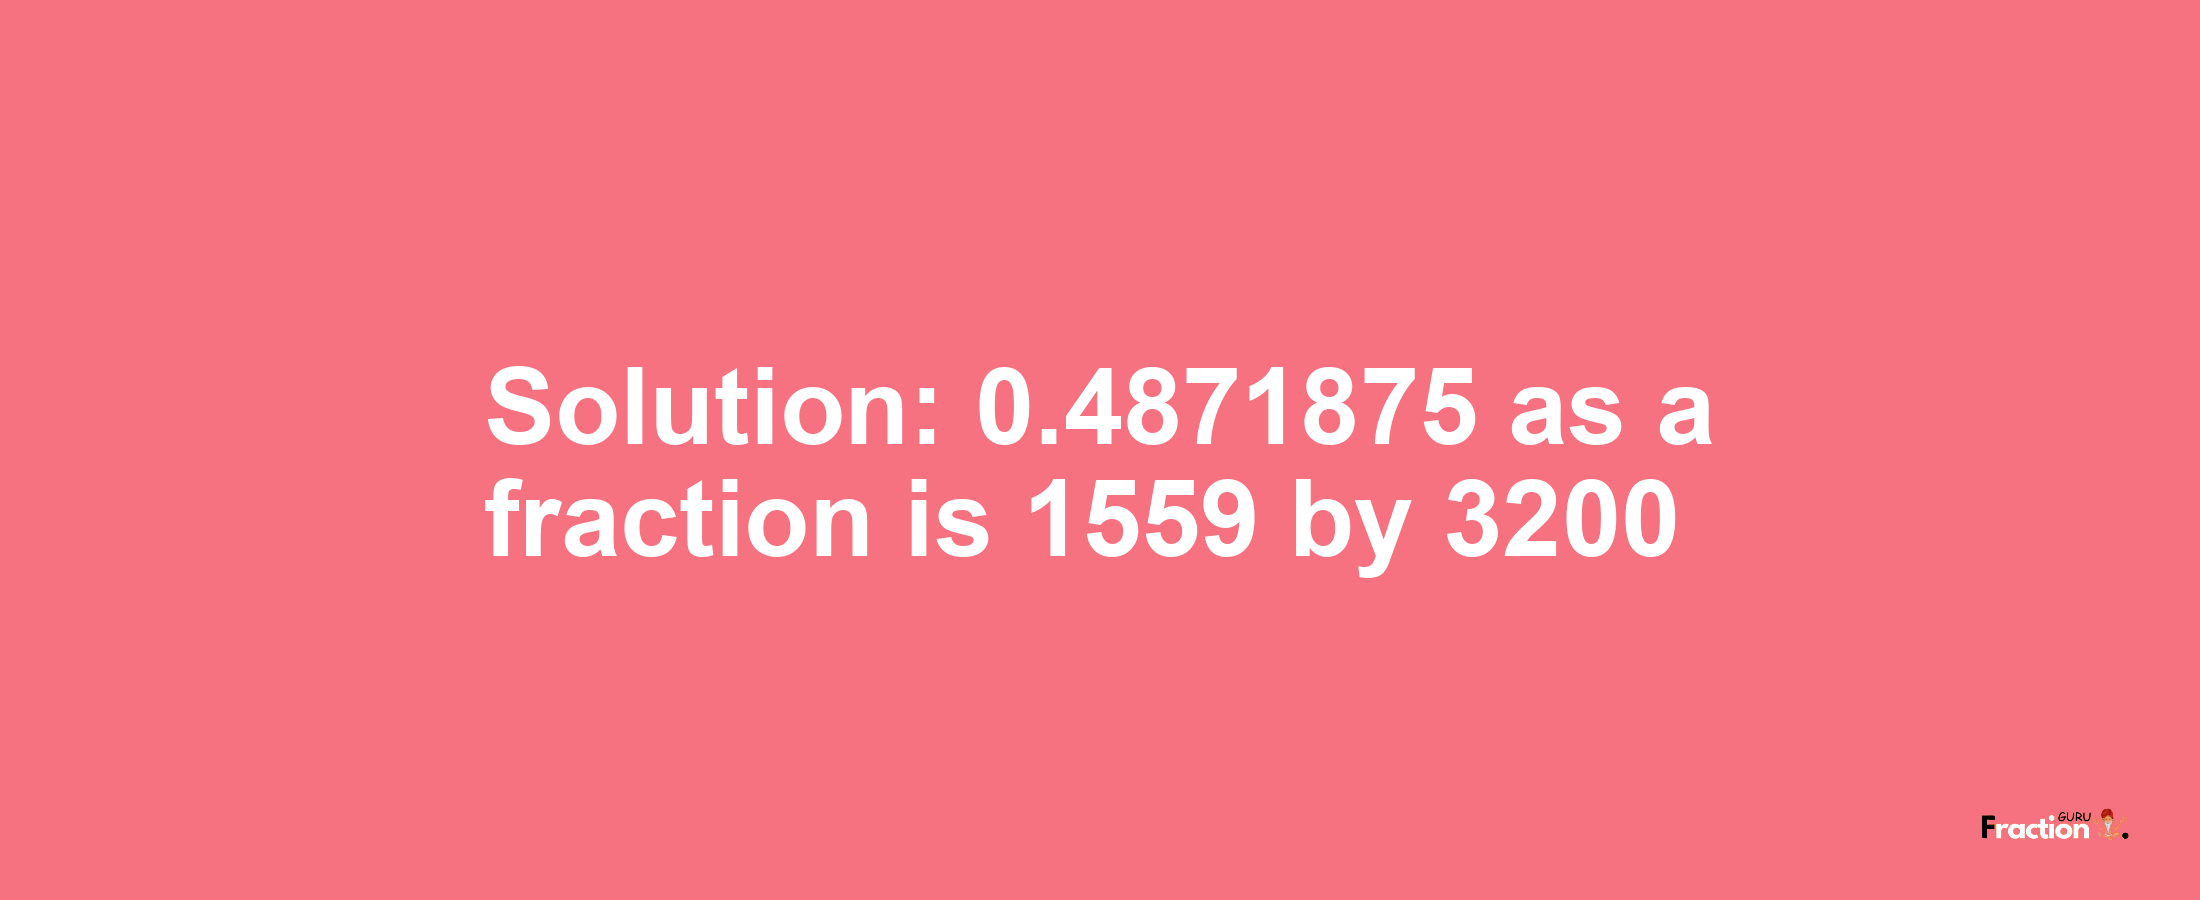 Solution:0.4871875 as a fraction is 1559/3200